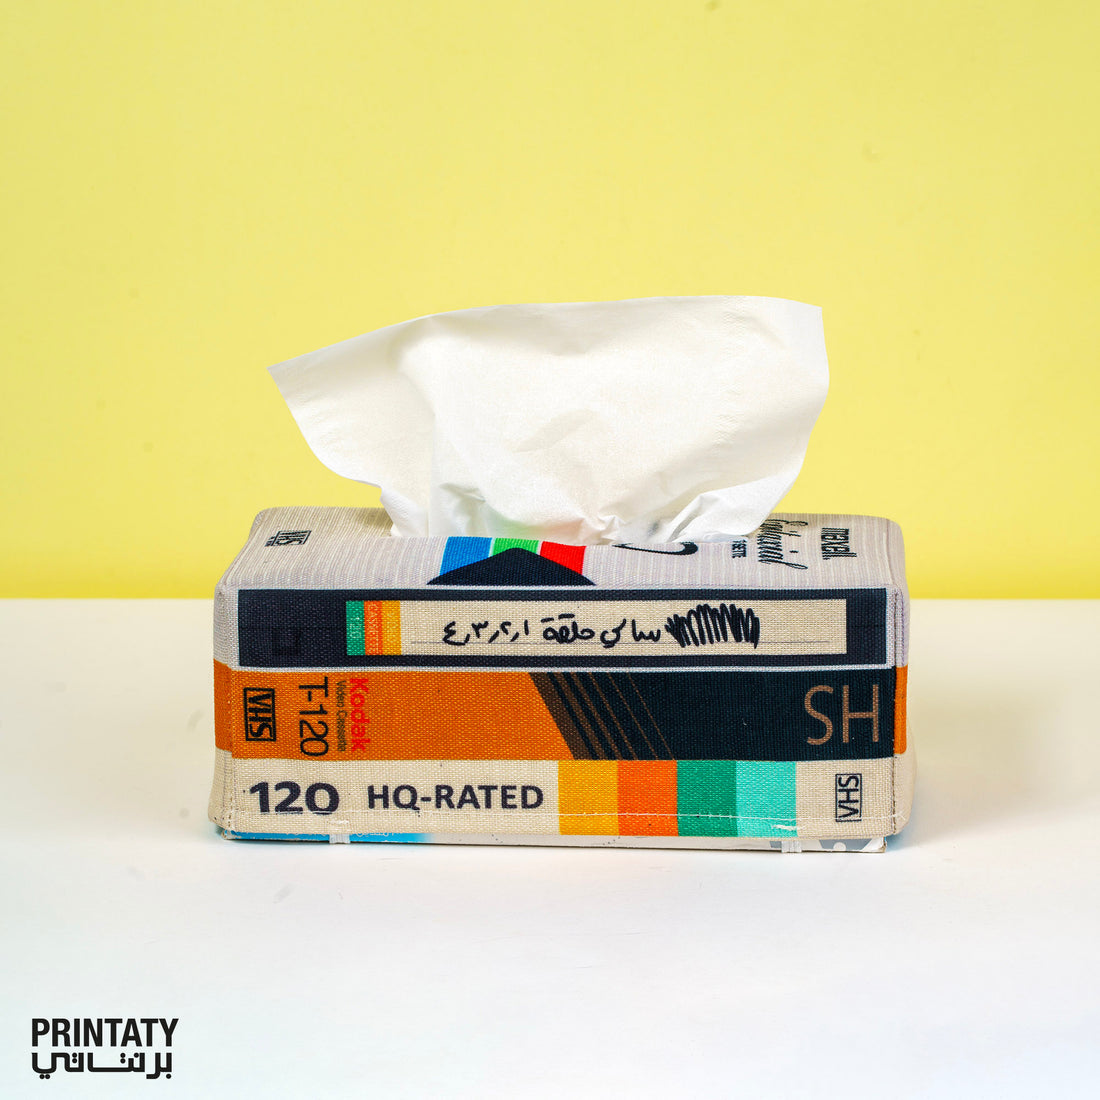 Tissue box cover : VHS tapes